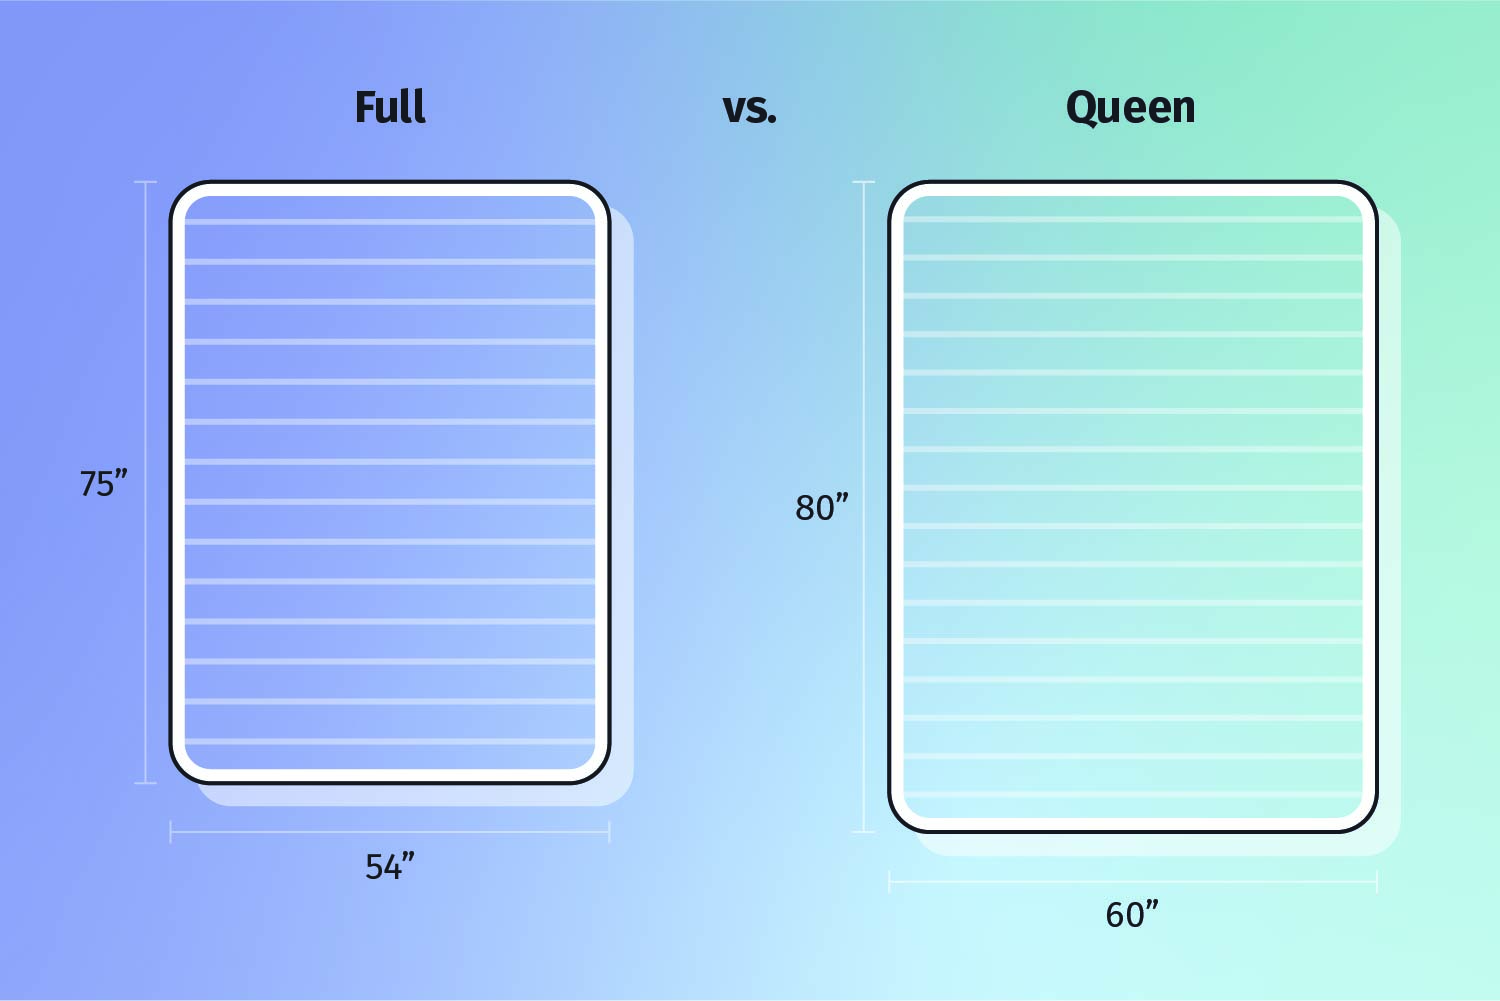 King vs. Queen Bed Comparison: Which Size Should You Choose?